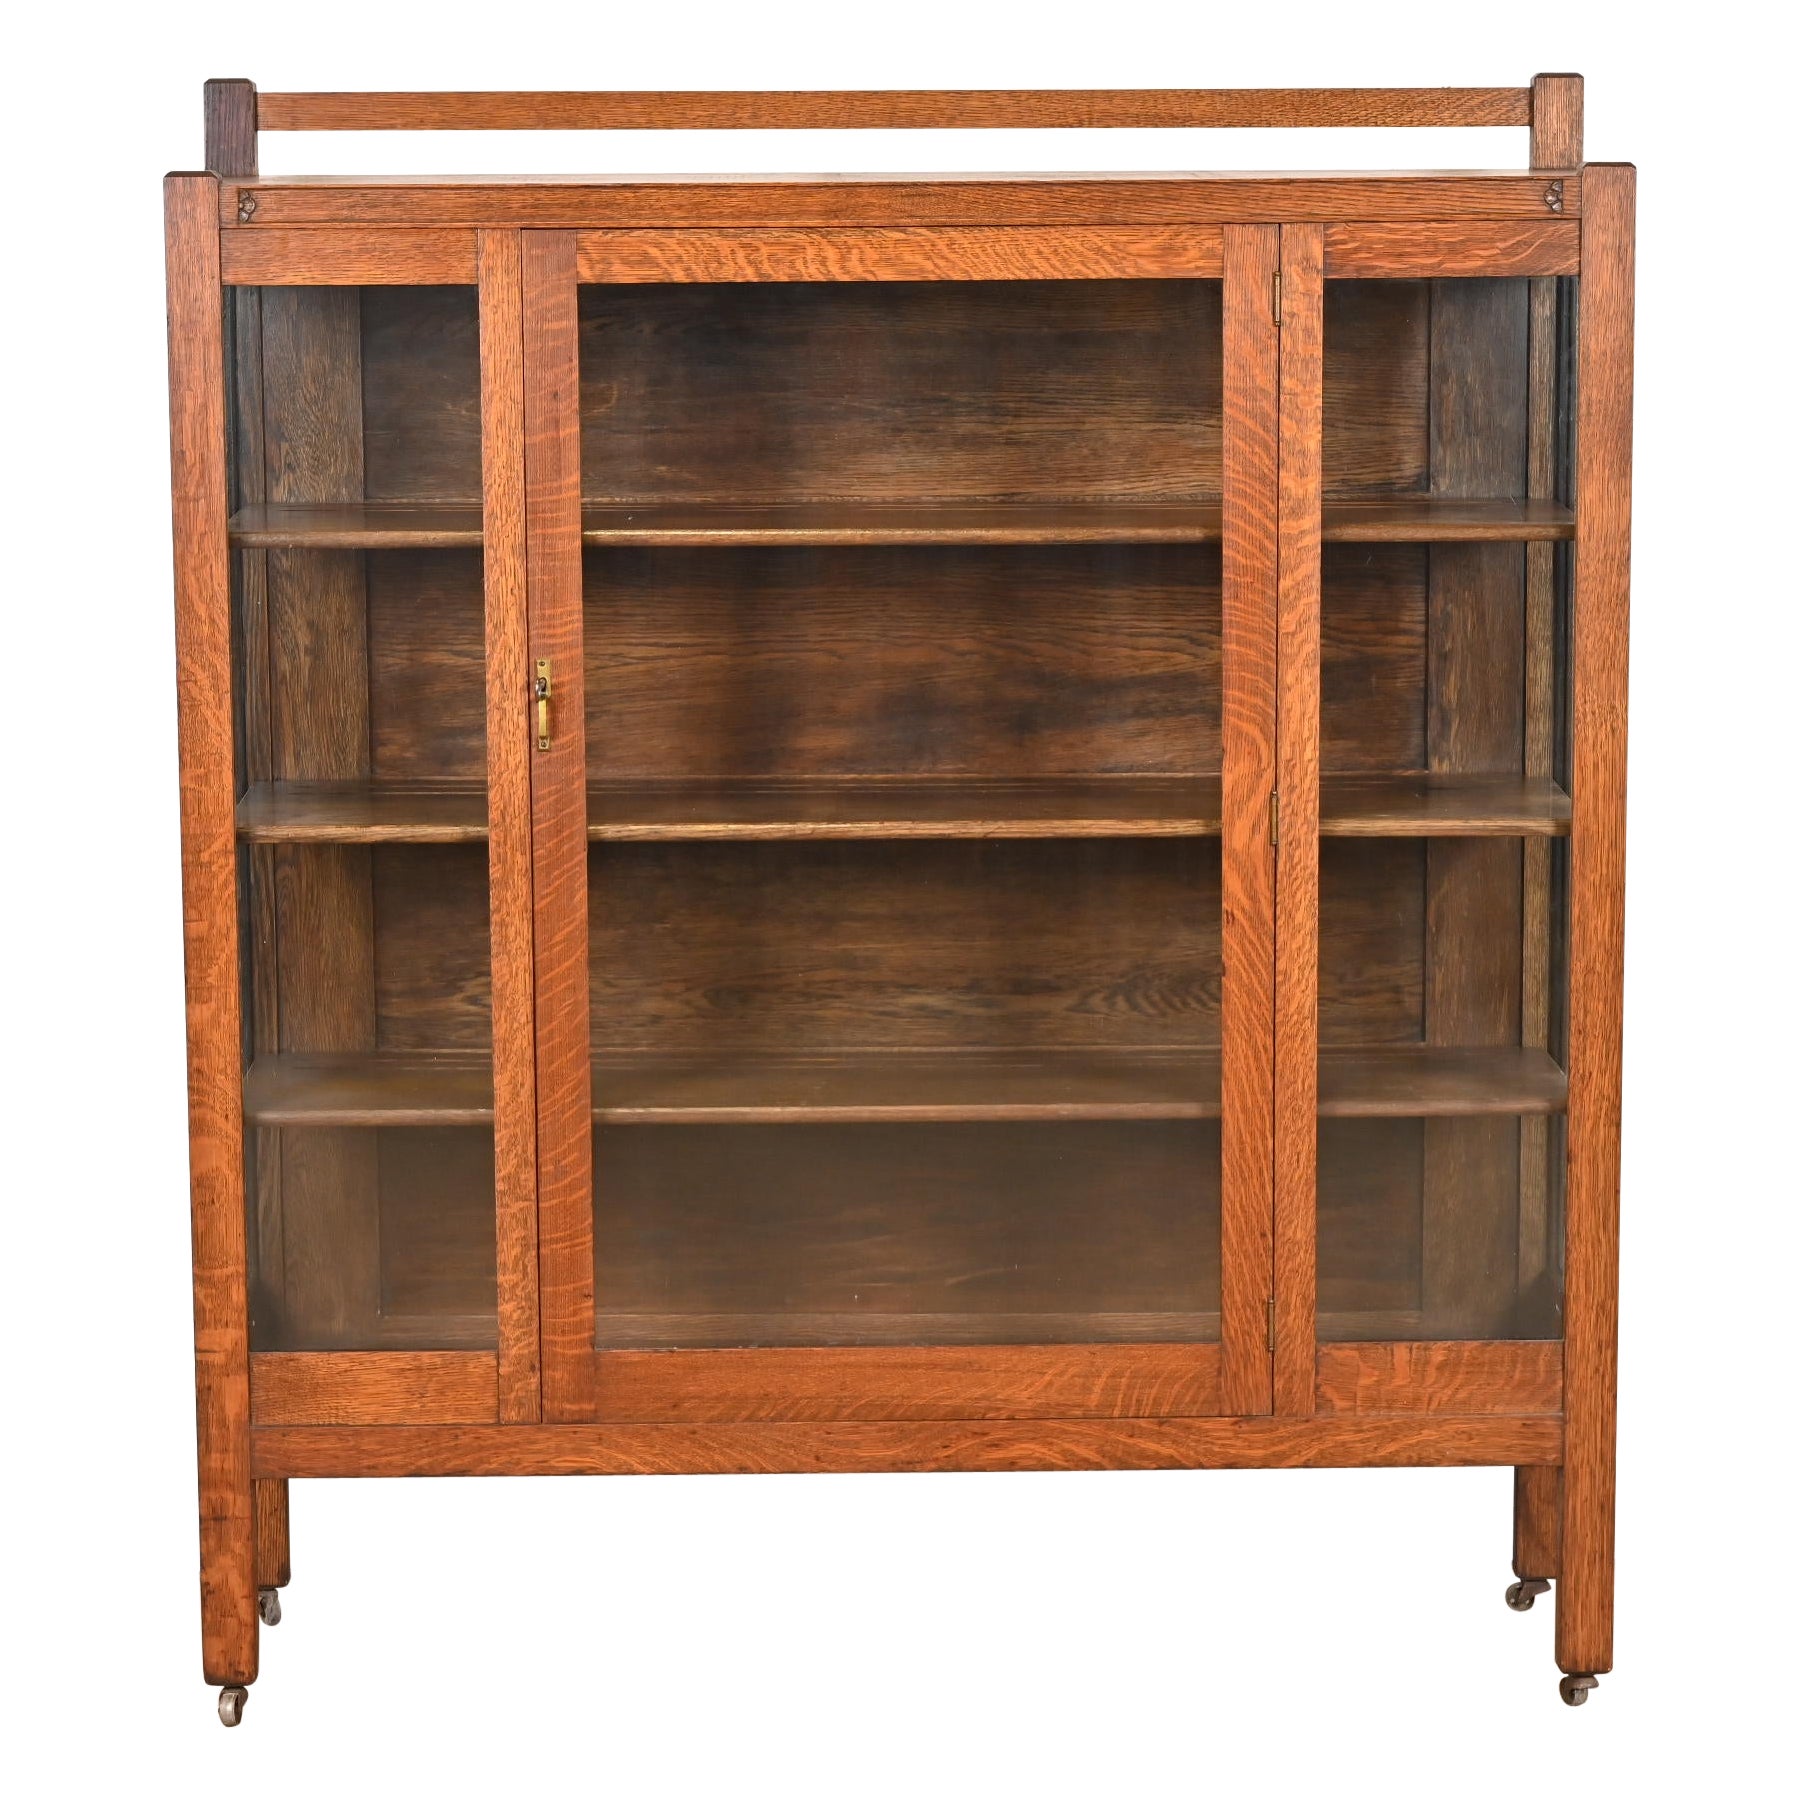 Antique Stickley Brothers Style Mission Oak Arts and Crafts Bookcase, Circa 1900 For Sale